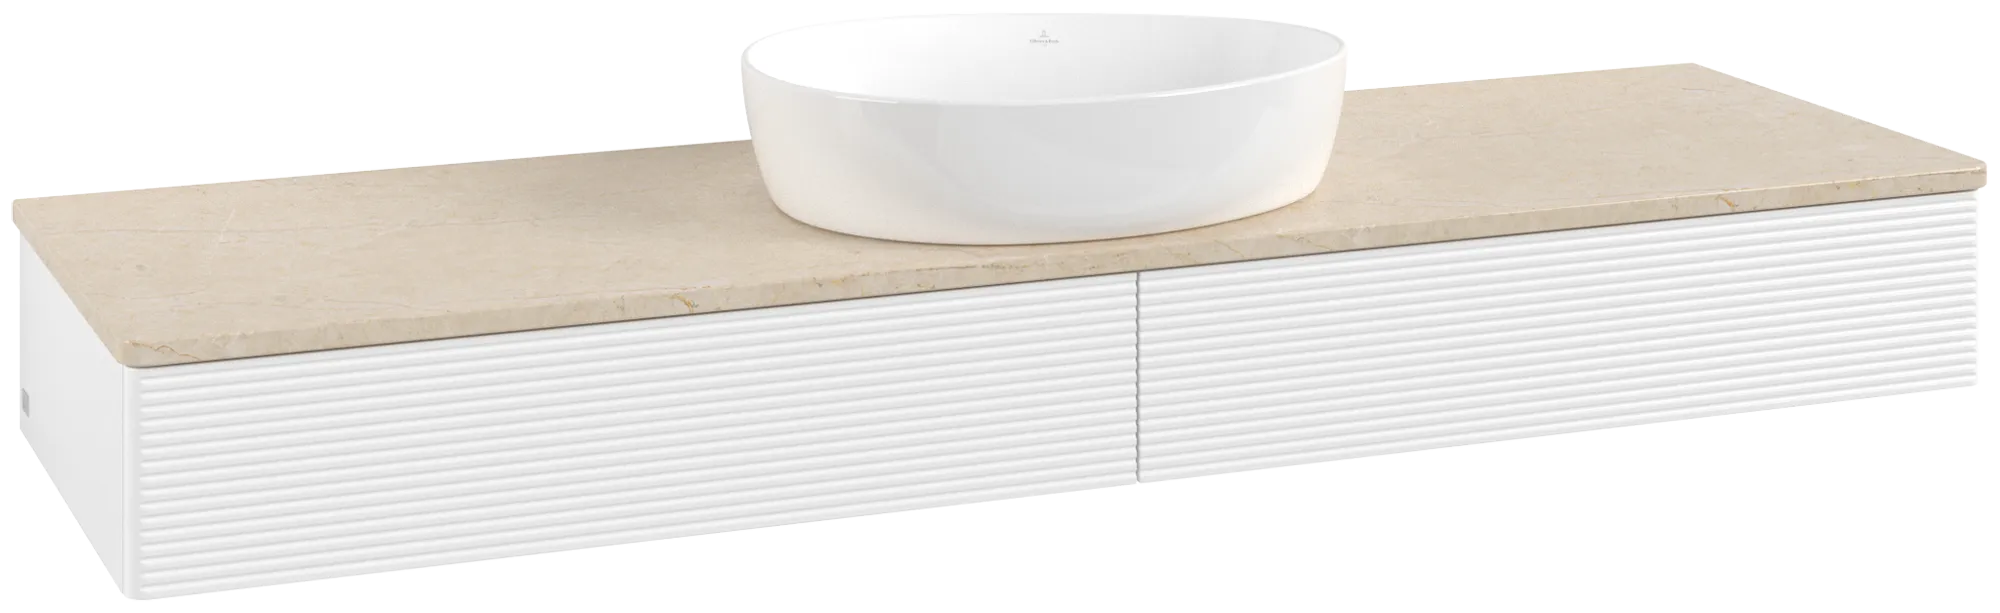 VILLEROY BOCH Antao Vanity unit, 2 pull-out compartments, 1600 x 190 x 500 mm, Front with grain texture, White Matt Lacquer / Botticino #K14113MT resmi